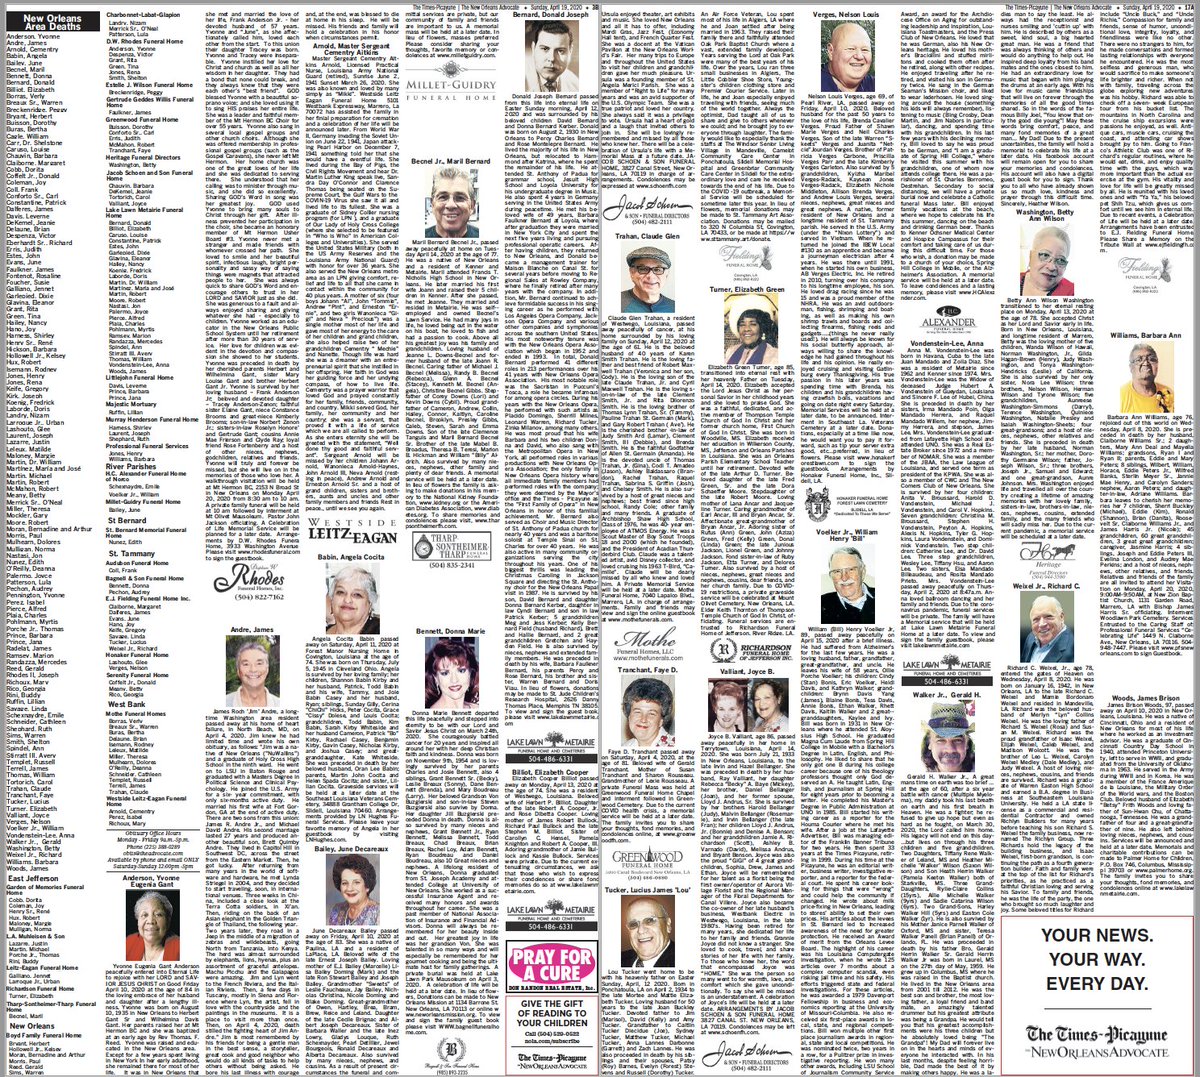 In today's  @NOLAnews, we had just over 8 pages of death notices. It's been like this the last few Sundays, which is the biggest day of readership. We used to consider 4 pages a lot. All of these beloved family members and friends for so many. And no funerals.